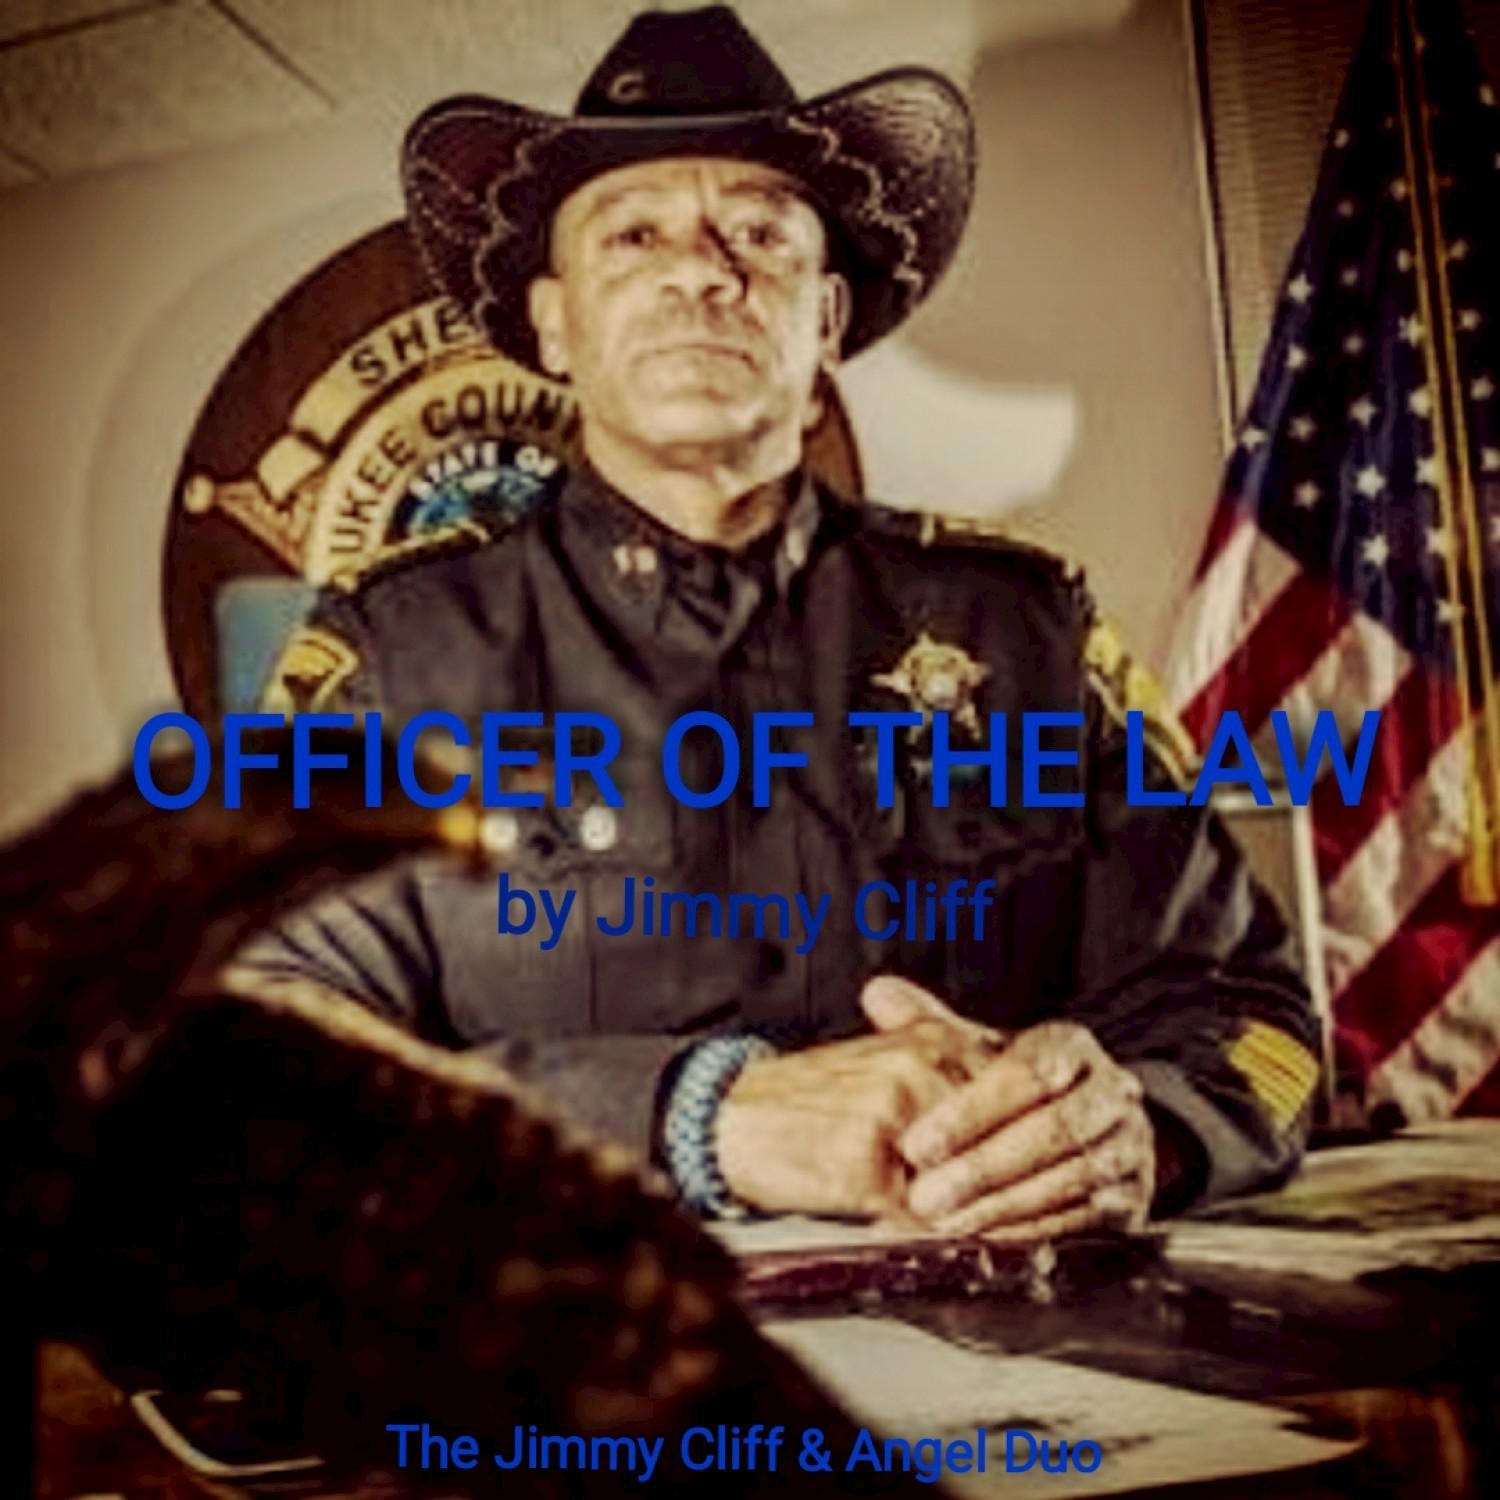 Officer of the Law